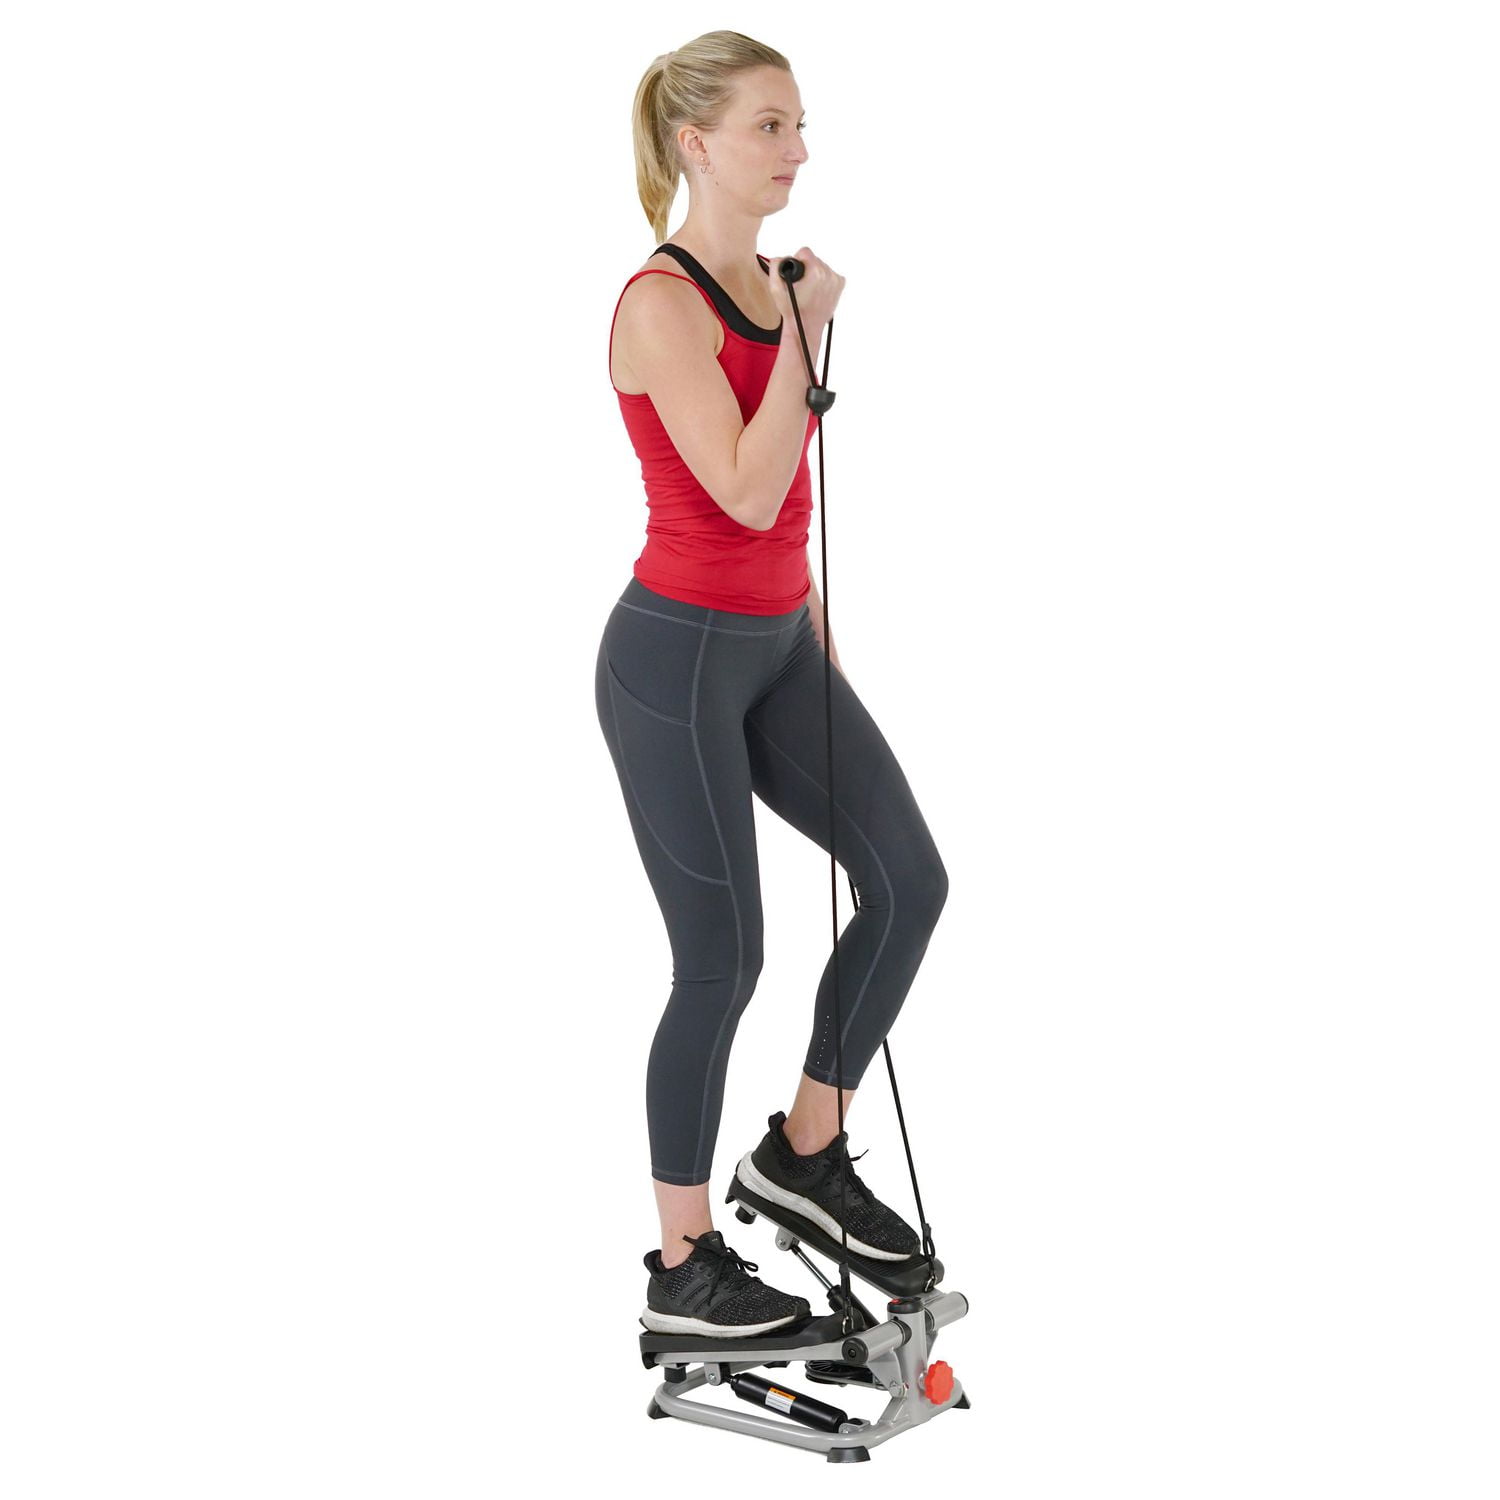 Stepper Machine Fitness Device and Exercise Kit - Pinamart